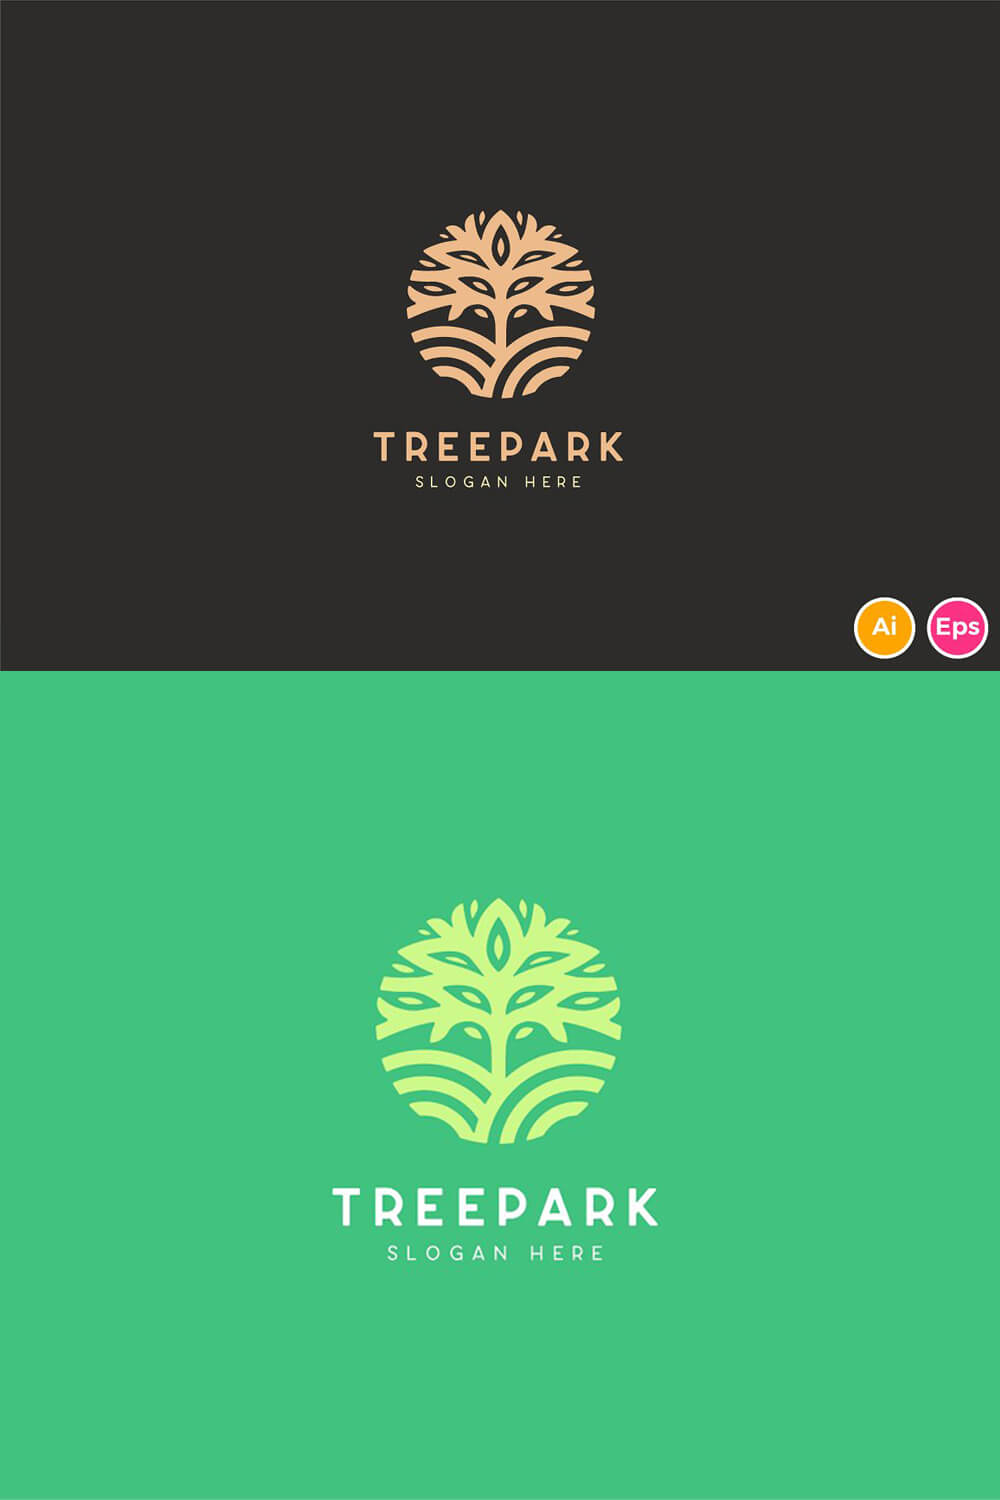 Two types of treepark logo on the green and black backgrounds.